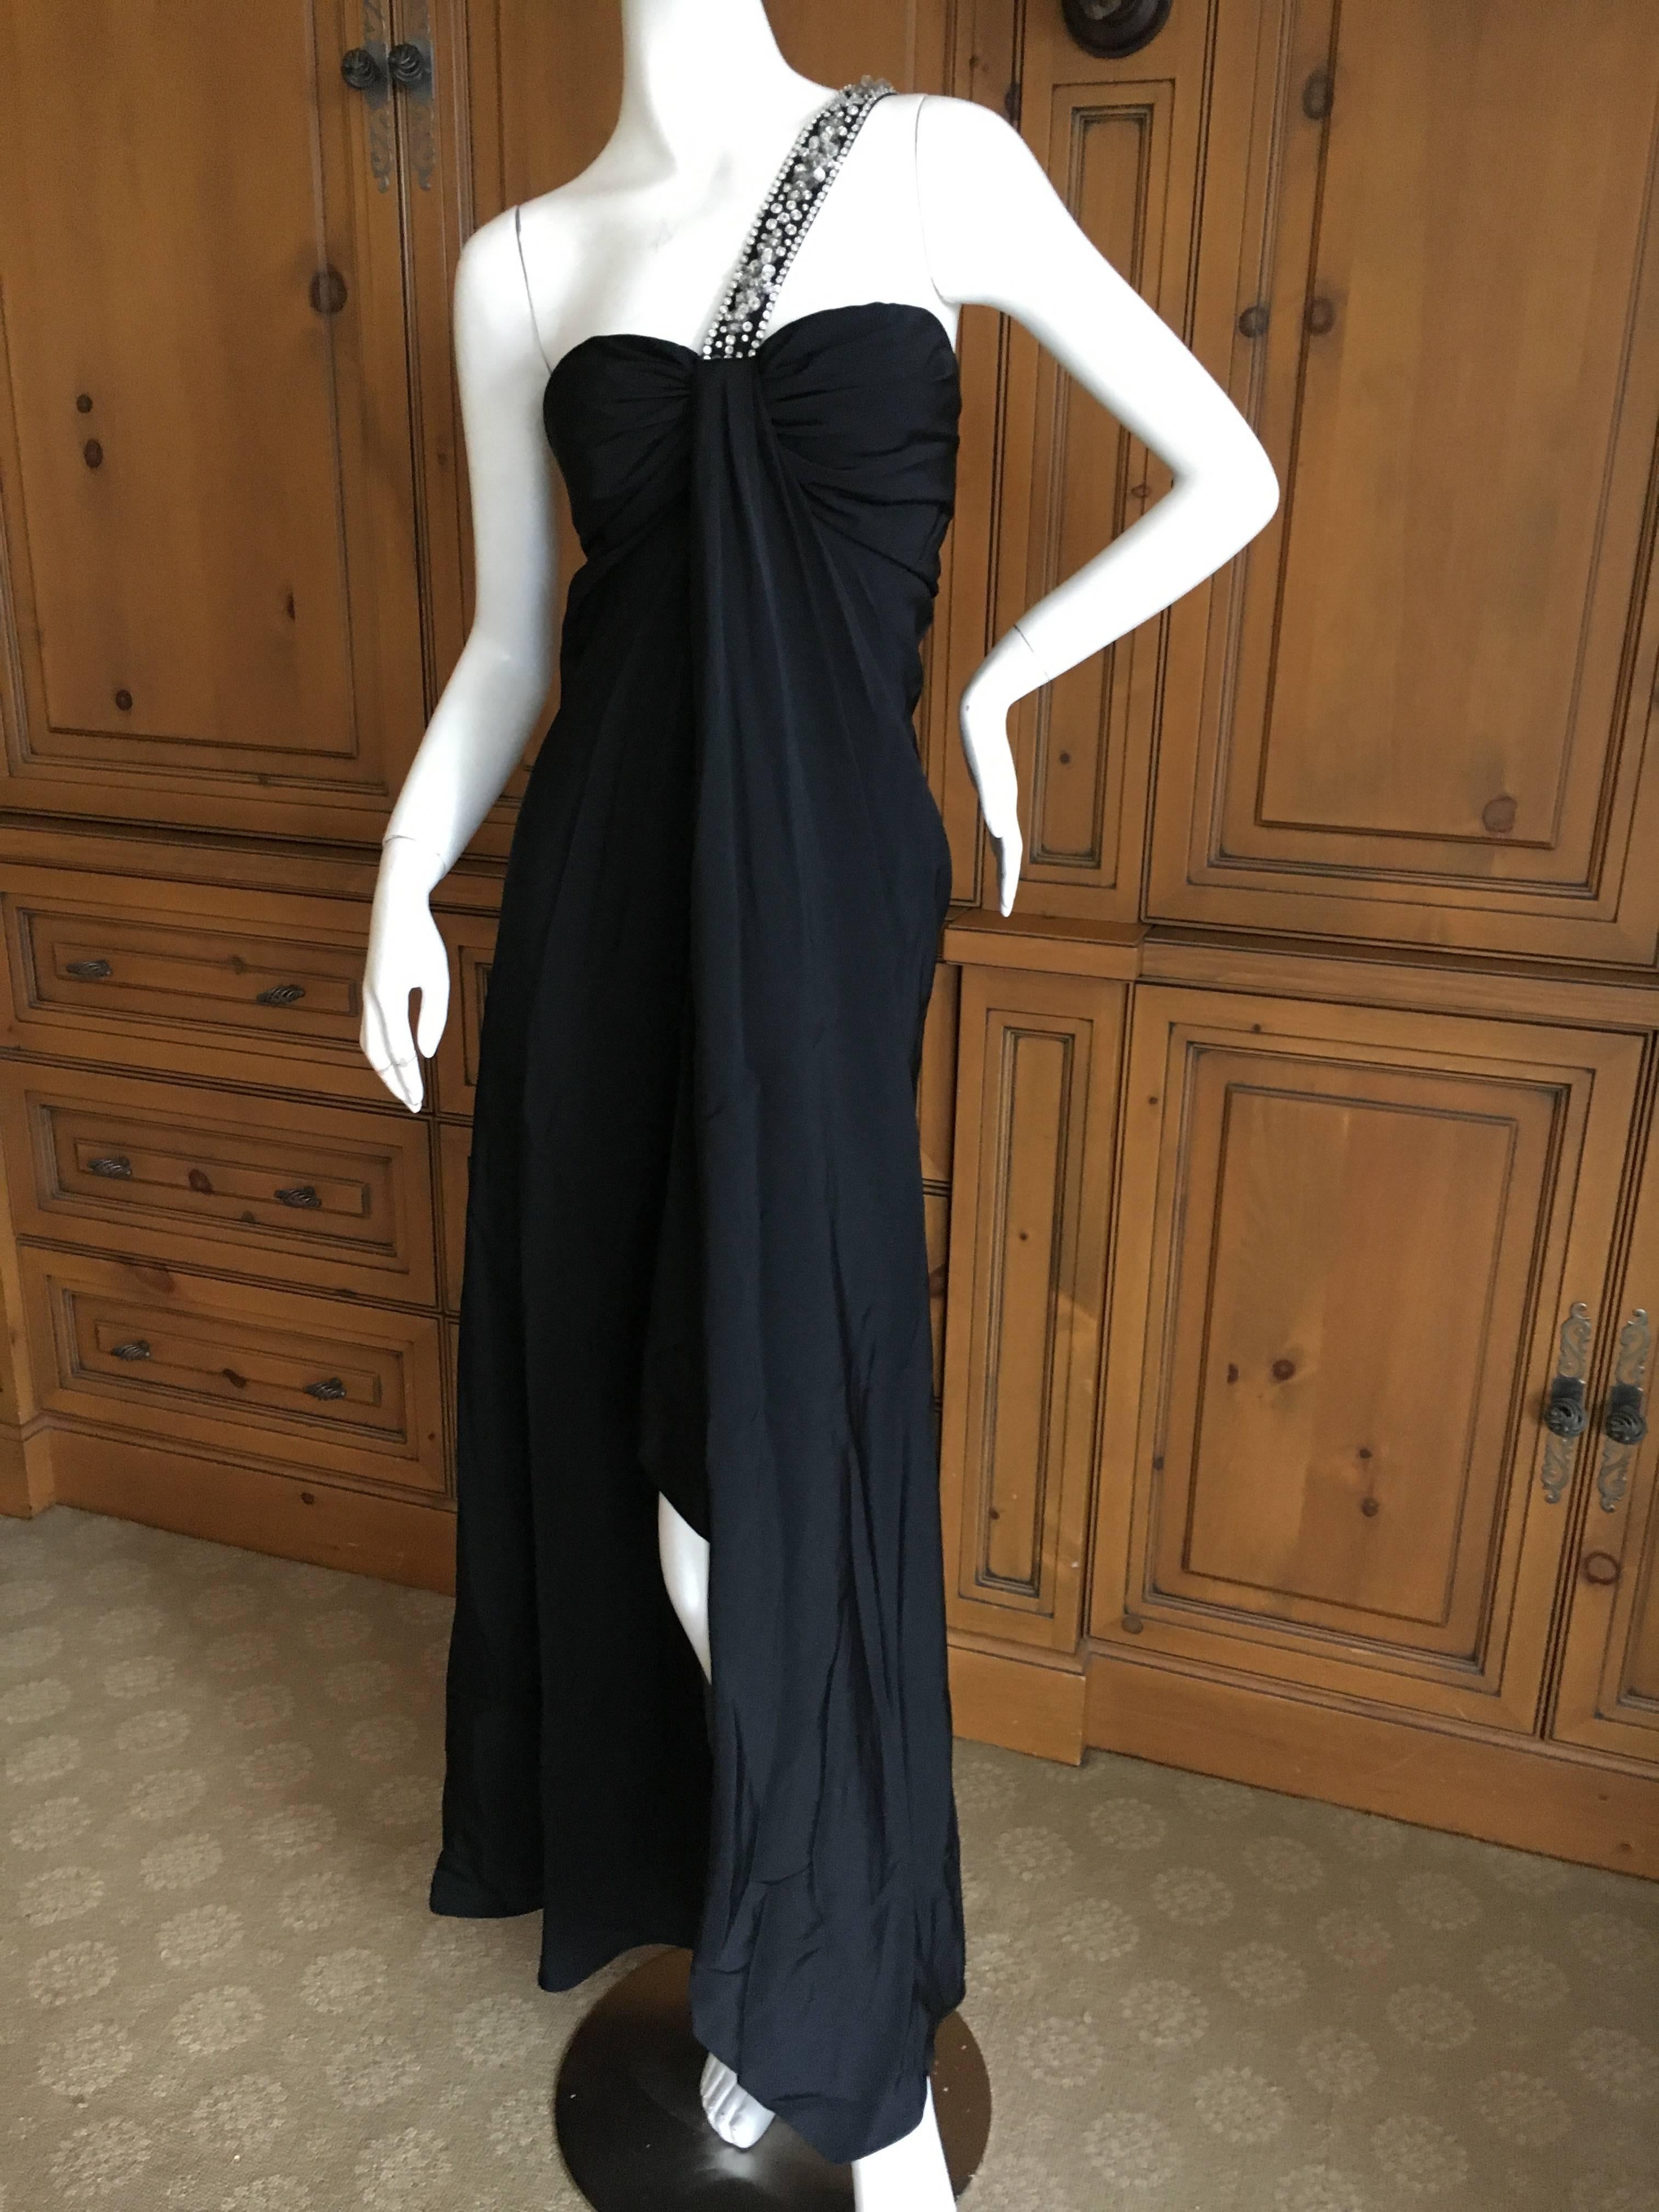 
 Galanos for Martha Park Avenue Black Silk Crepe Dress with Jeweled Strap

Size Small
Bust 34